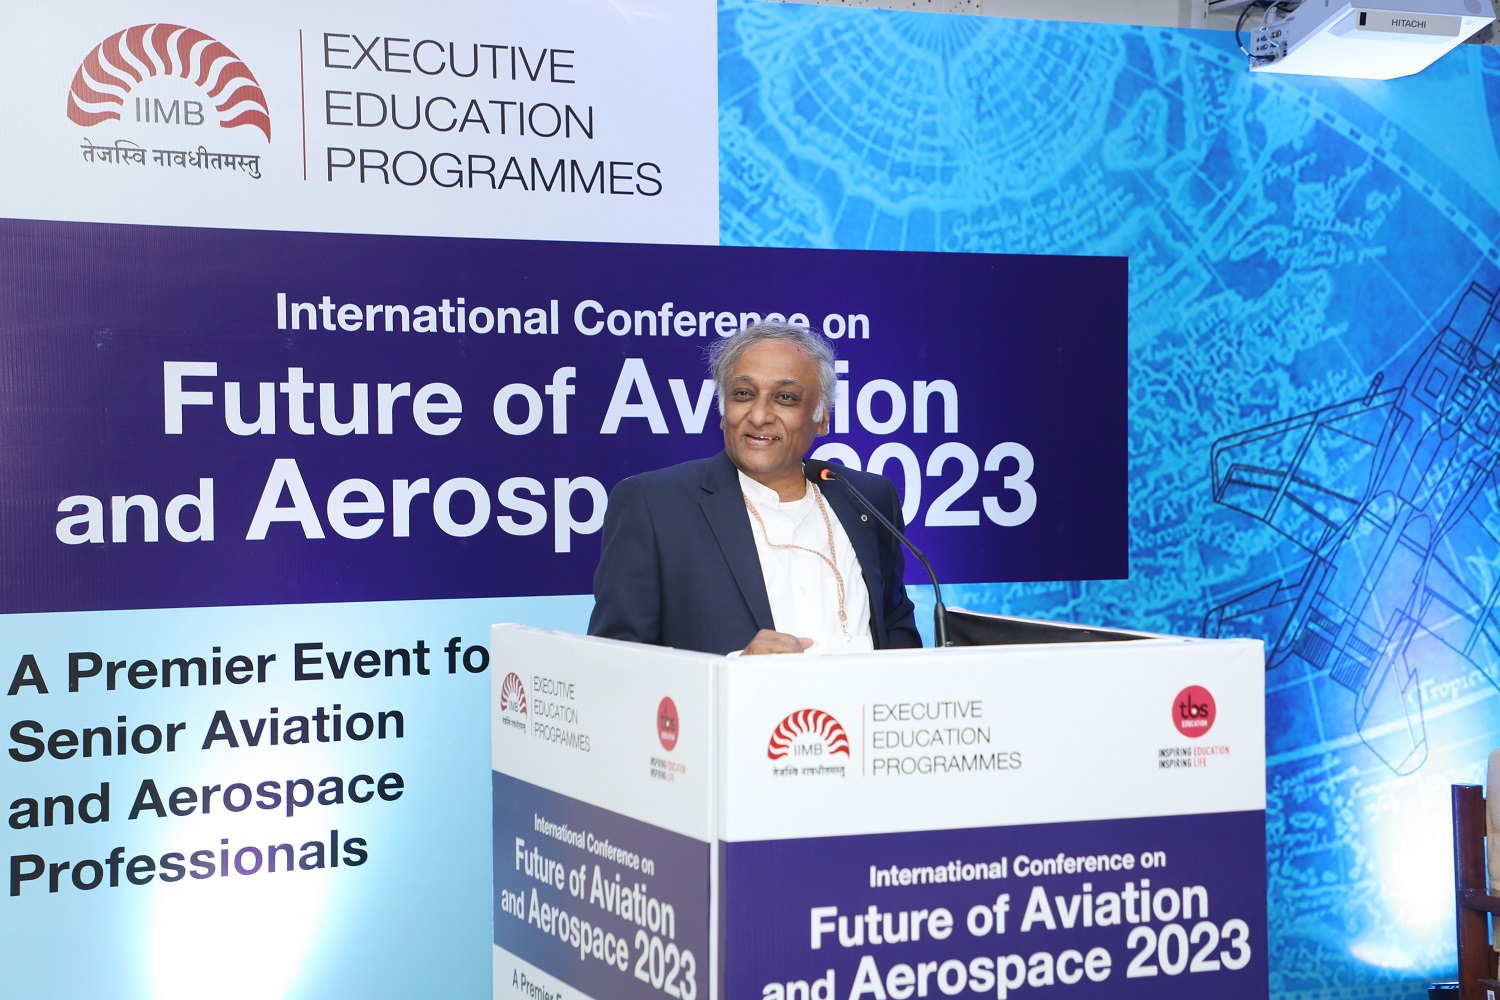 Prof. S Raghunath, faculty IIM Bangalore and Conference Chair, addresses the gathering at the ‘International Conference on Future of Aviation & Aerospace 2023.